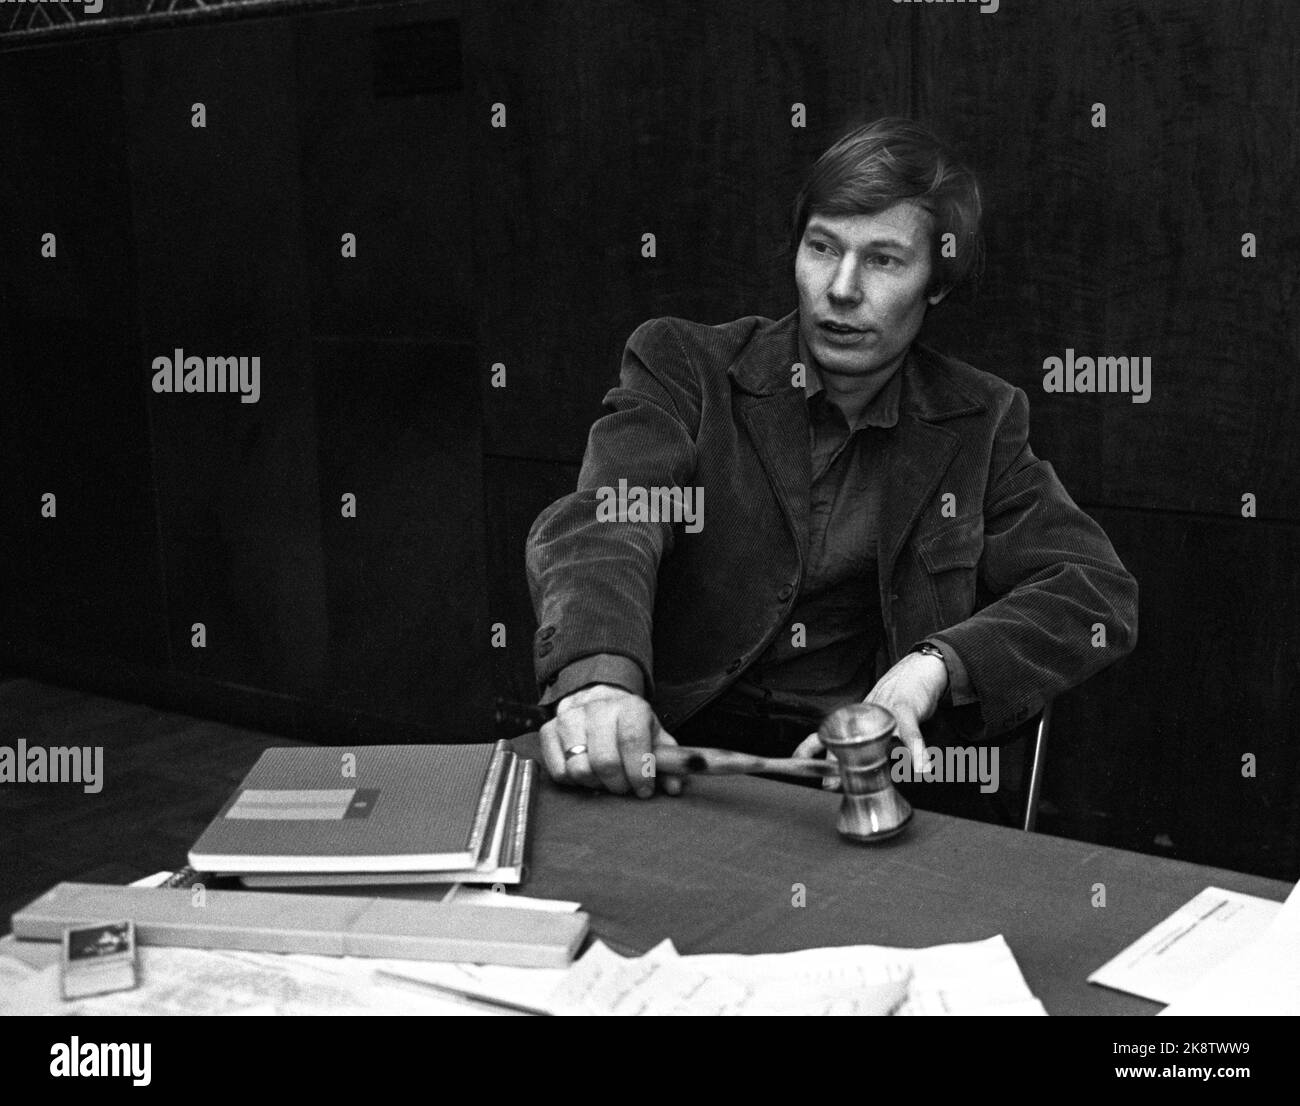 Oslo on March 24, 1973. 'Another generation Gerhardsen has been given a central position in the labor movement. Rune Gerhardsen has been elected as new chairman of the AUF at a national meeting characterized by strong contradictions. The new chairman will get a hard job of managing and gathering the organization.' Photo: Terje Akerhaug / Current / NTB Stock Photo